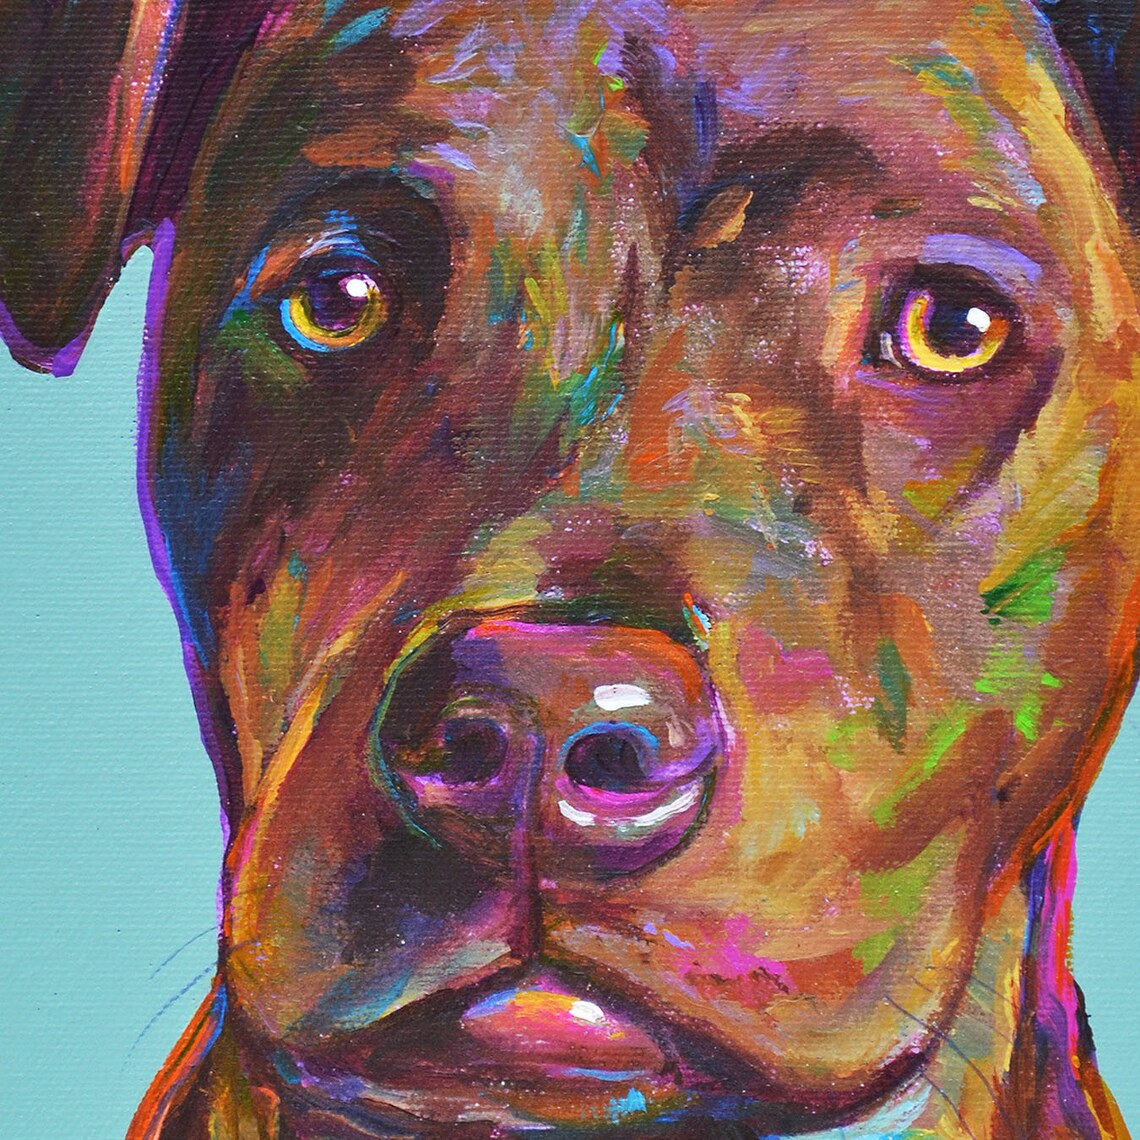 Fawn BRINDLE PIT BULL Art Print by Robert Phelps Pit Bull - Etsy